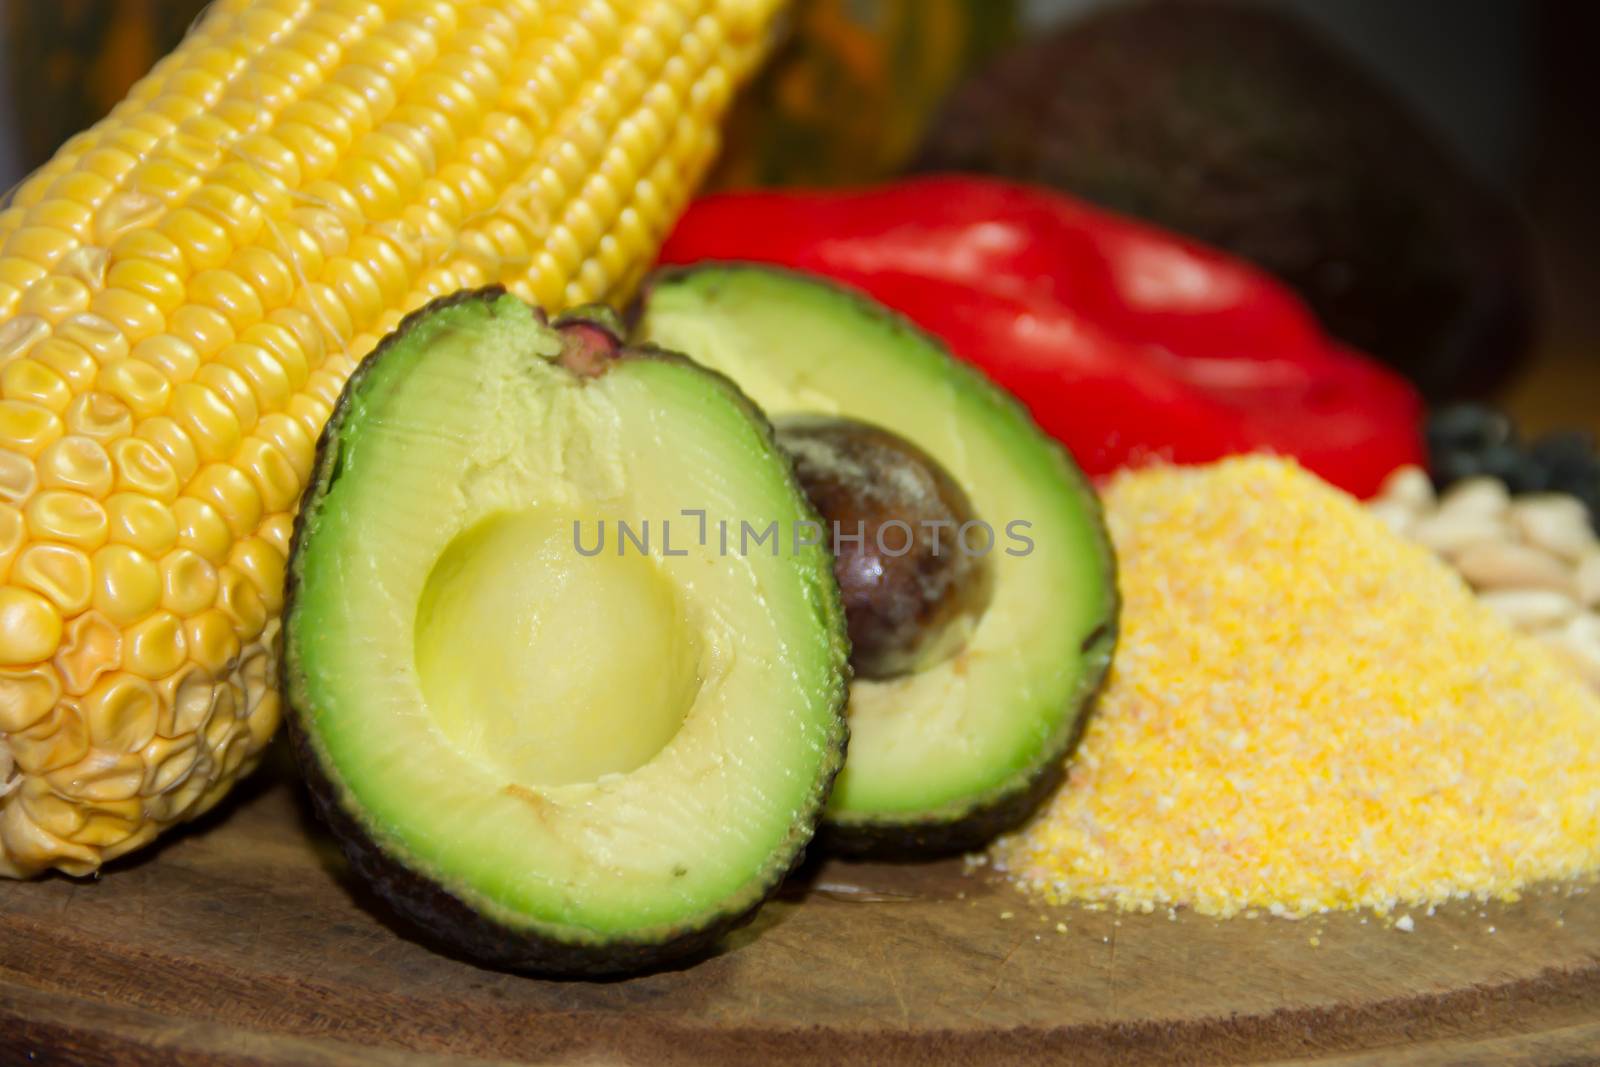 corn meal with avocado and other Mexican food ingredients by GabrielaBertolini